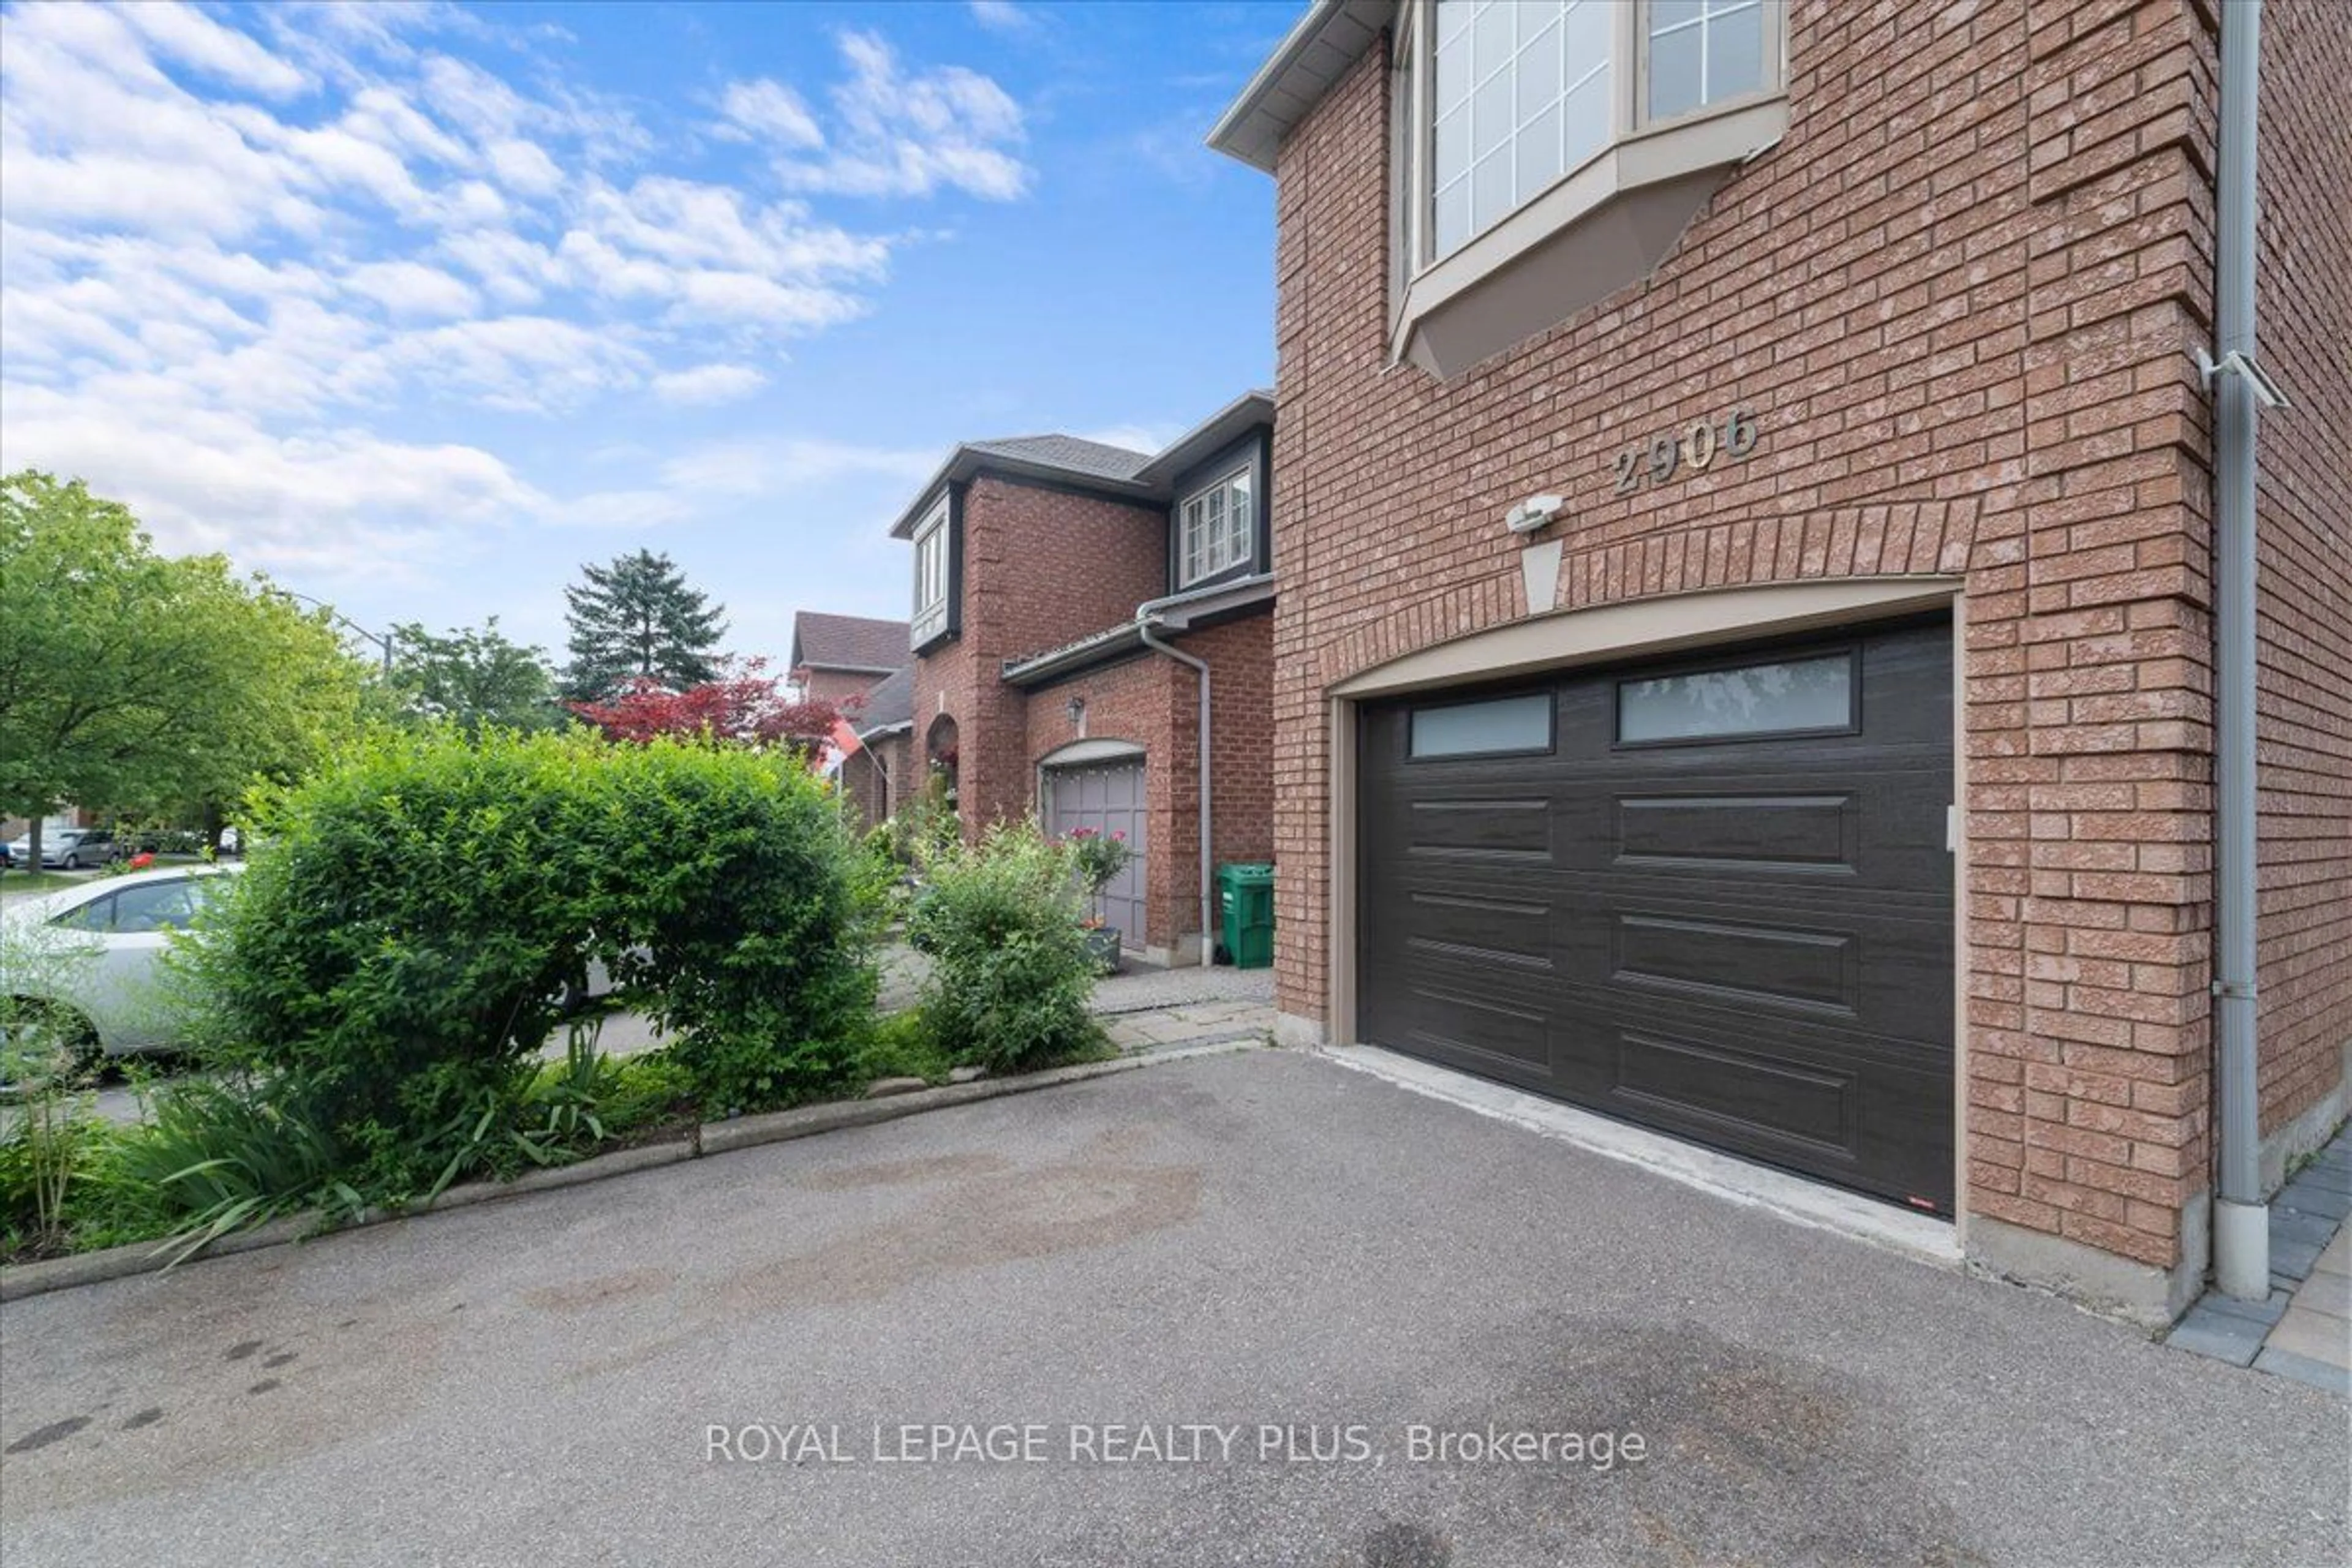 A pic from exterior of the house or condo for 2906 Gulfstream Way, Mississauga Ontario L5N 6K3